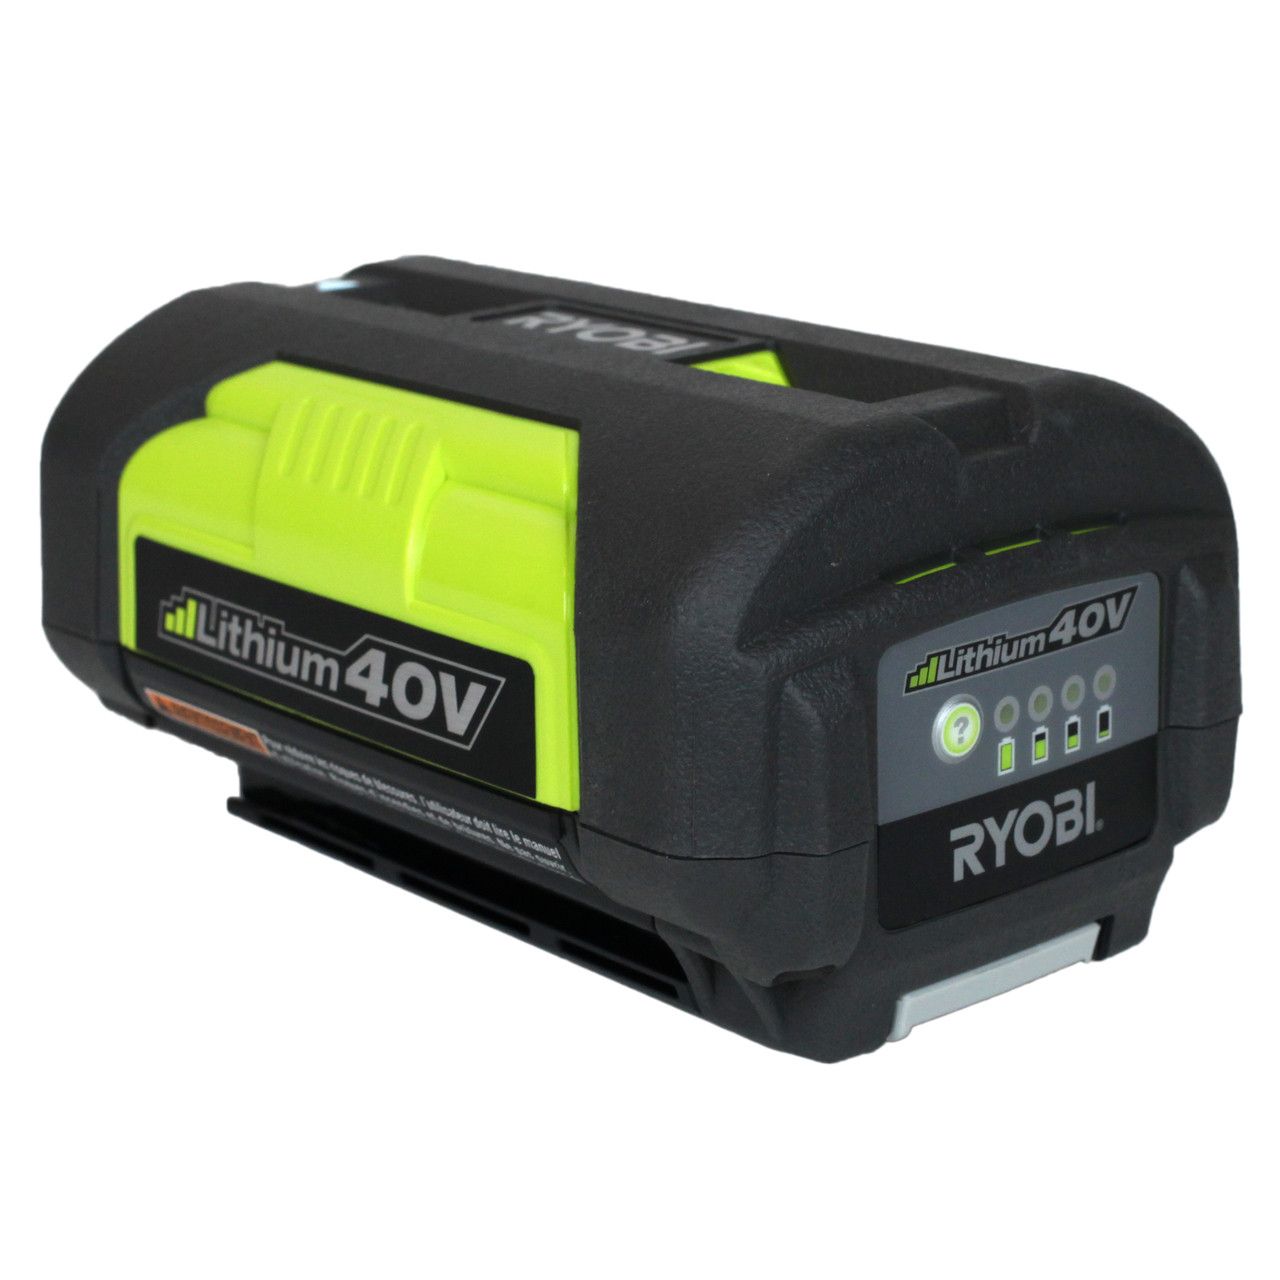 How Long Does It Take For A Ryobi Battery To Charge